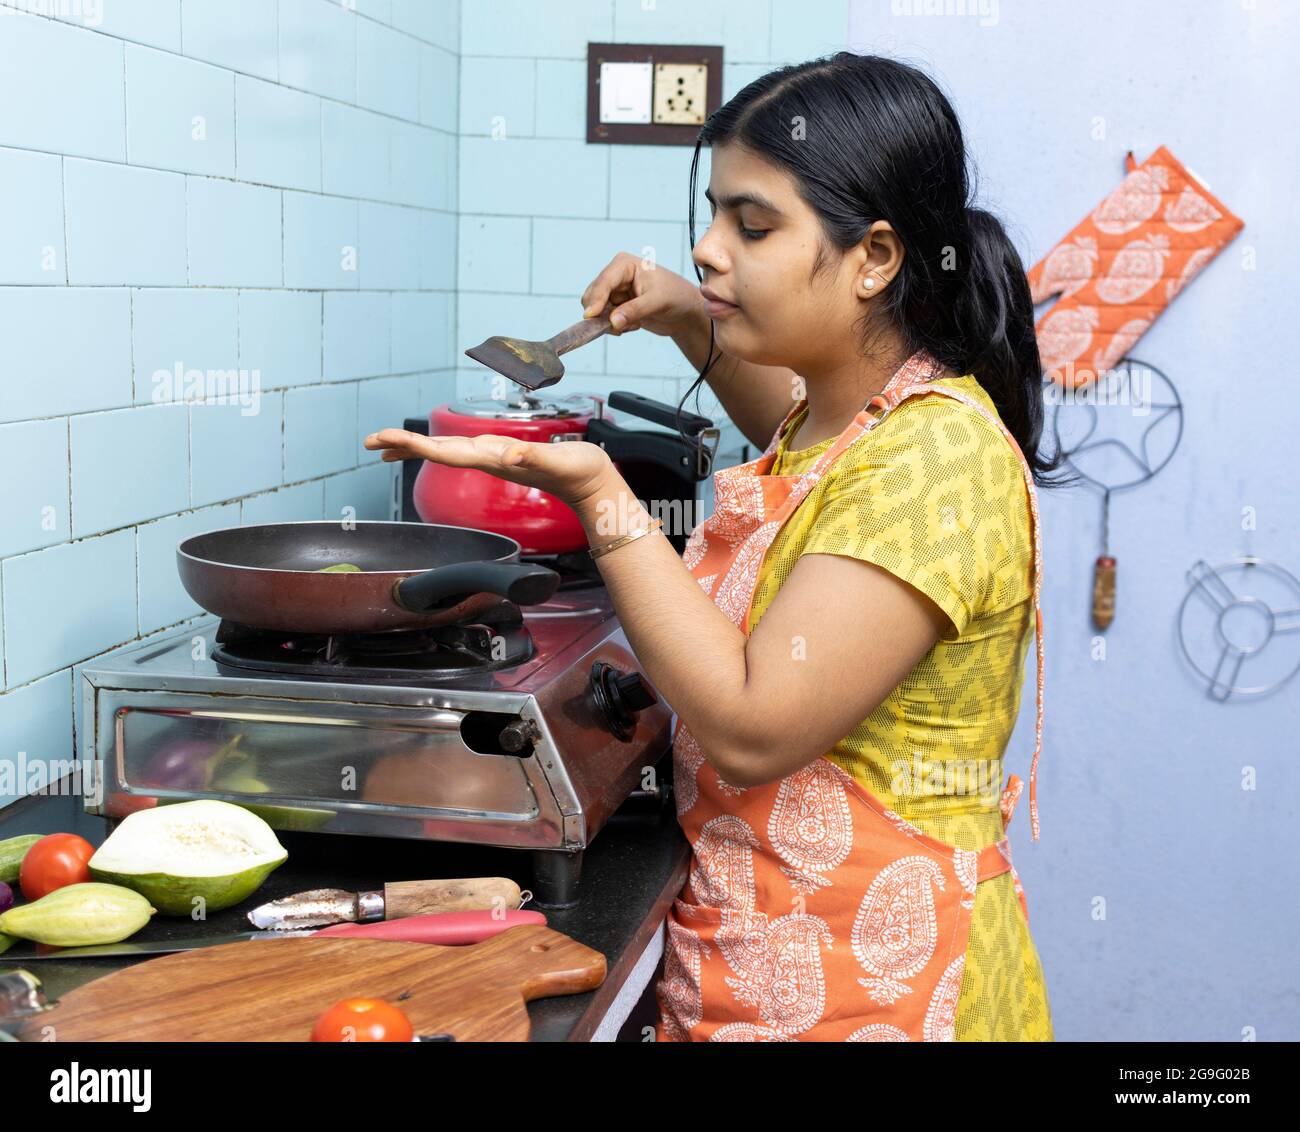 A Pretty Indian Young Woman Wearing Apron Cooking And Tasting Food In 